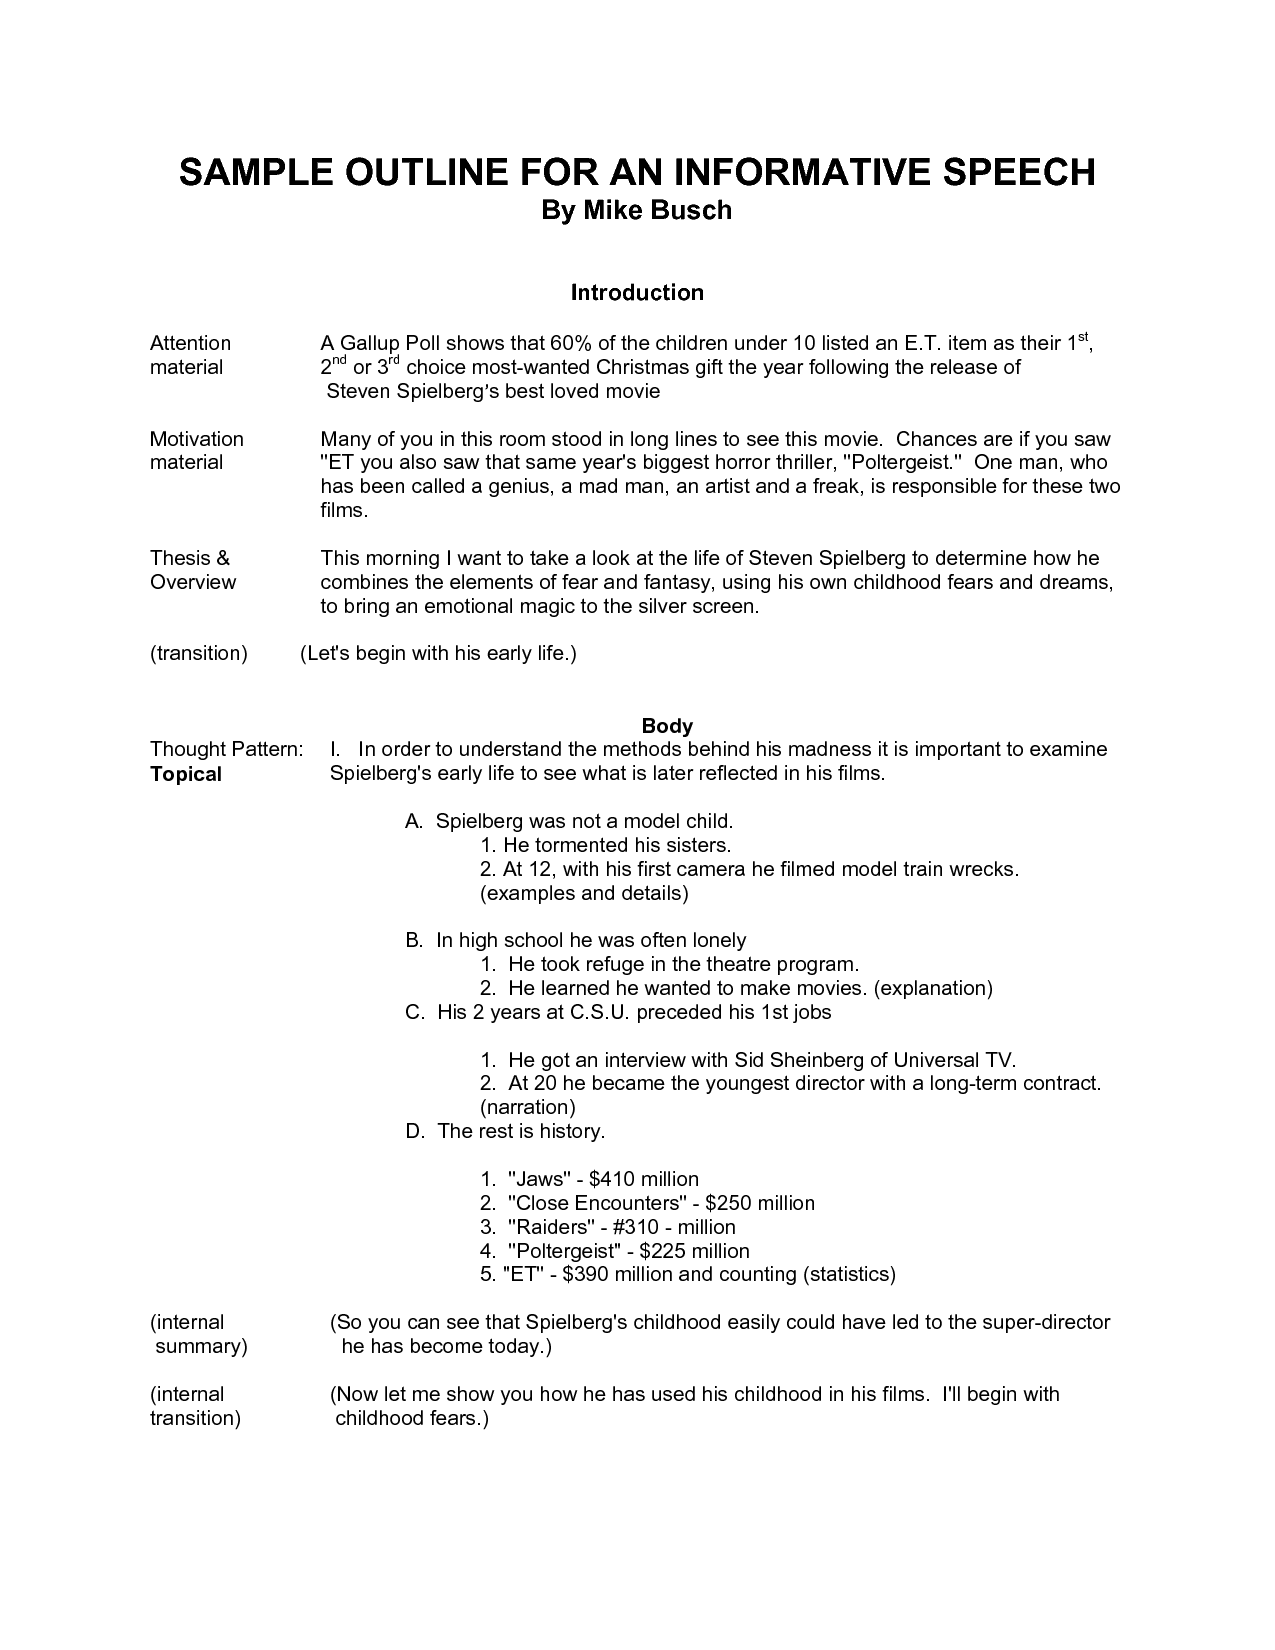 informative speech outline template   Ecza.solinf.co